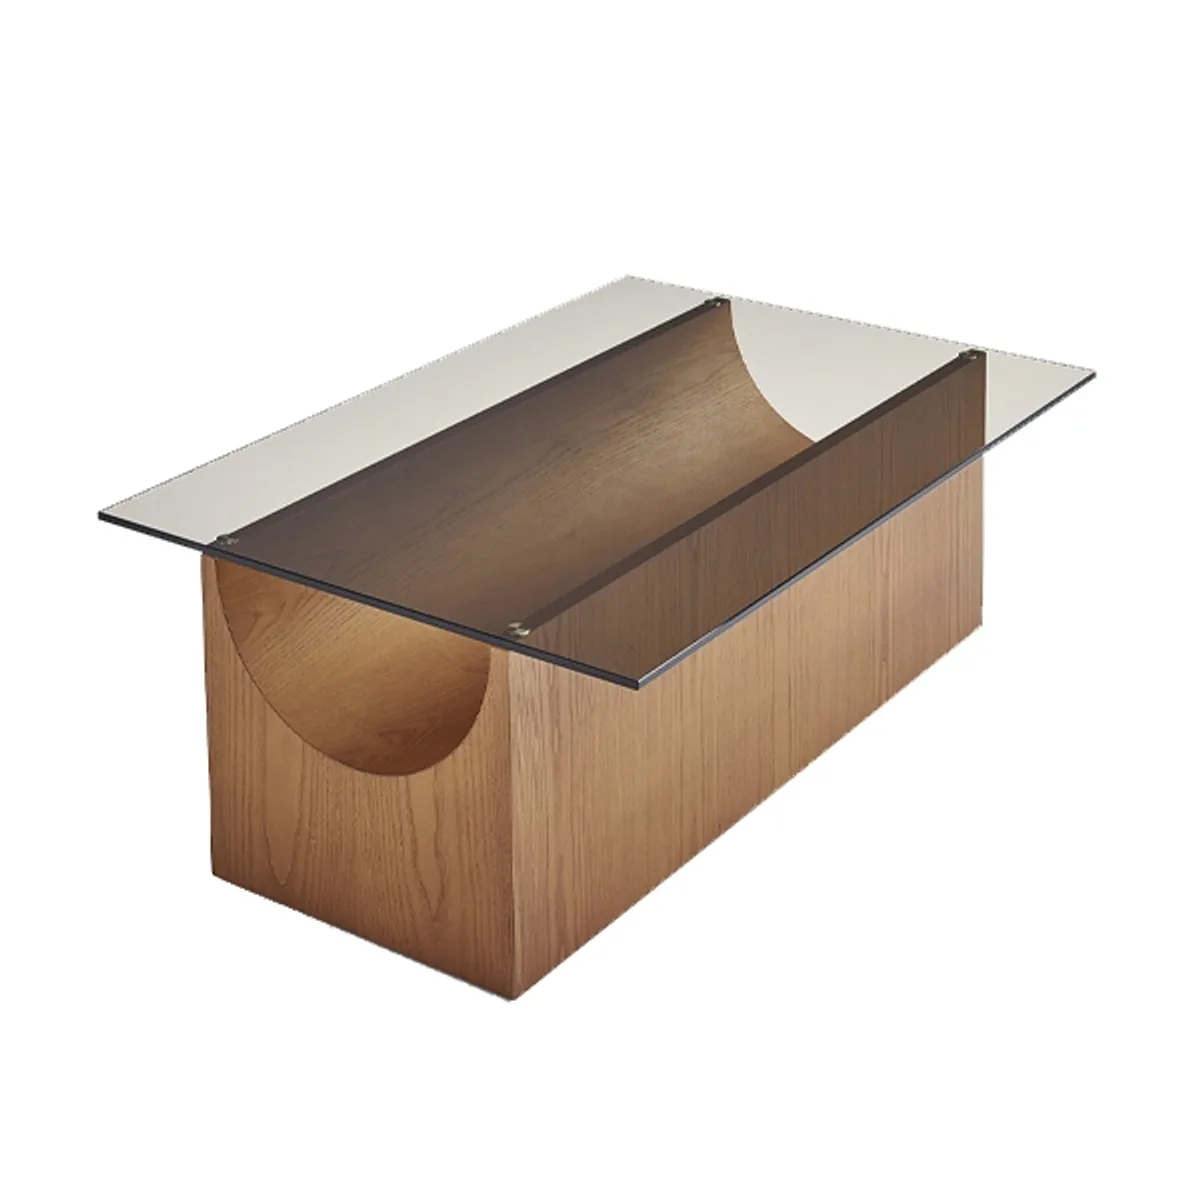 Vestige square coffee table Inside Out Contracts2